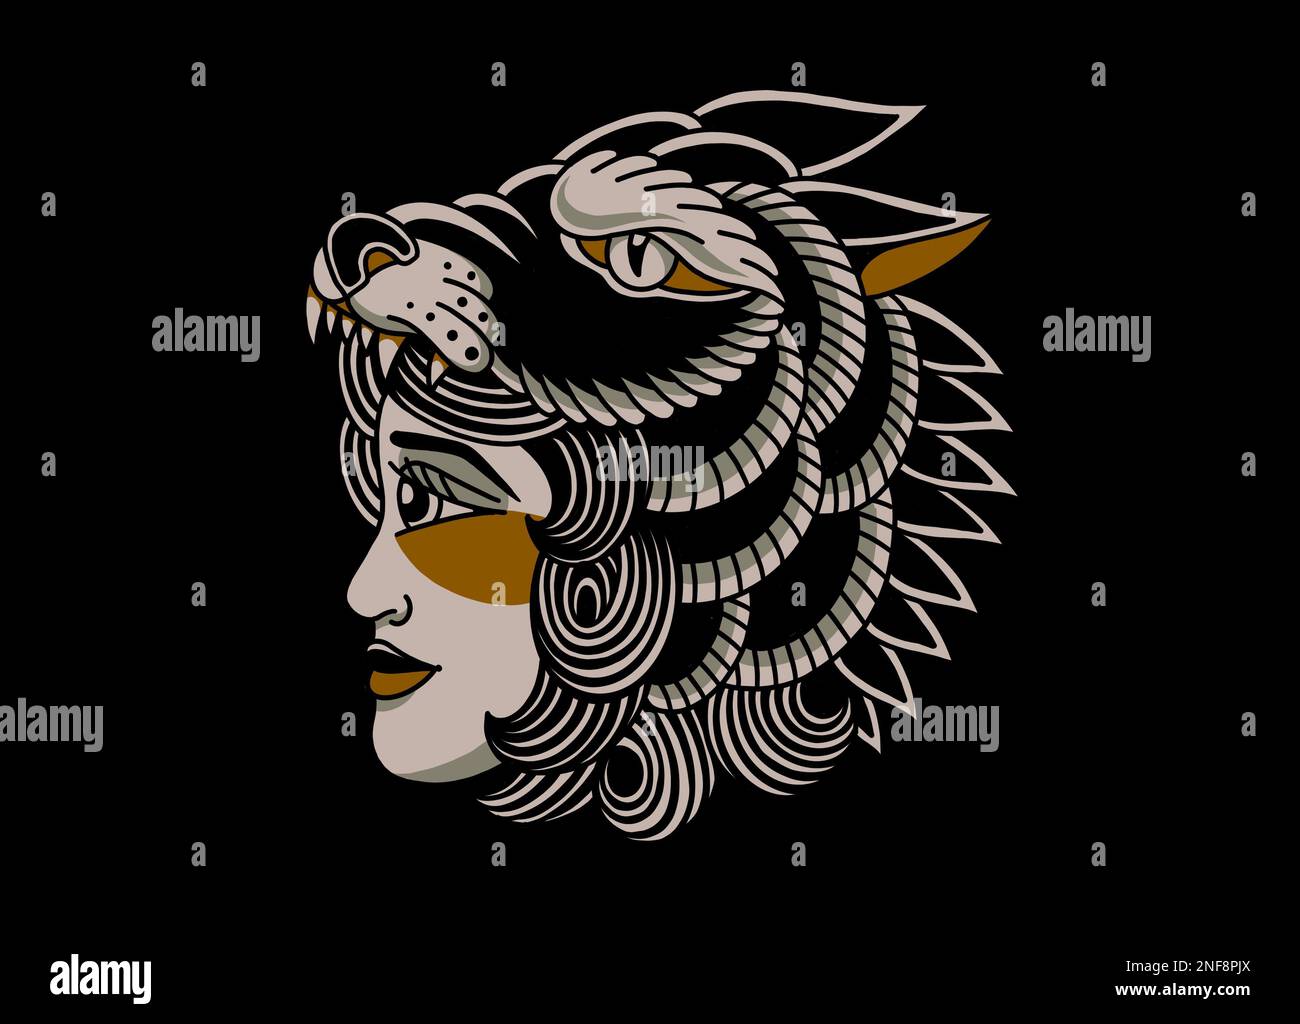 Old school traditional tattoo inspired cool graphic design illustration woman face side view with dead wolf head gear on black background Stock Photo